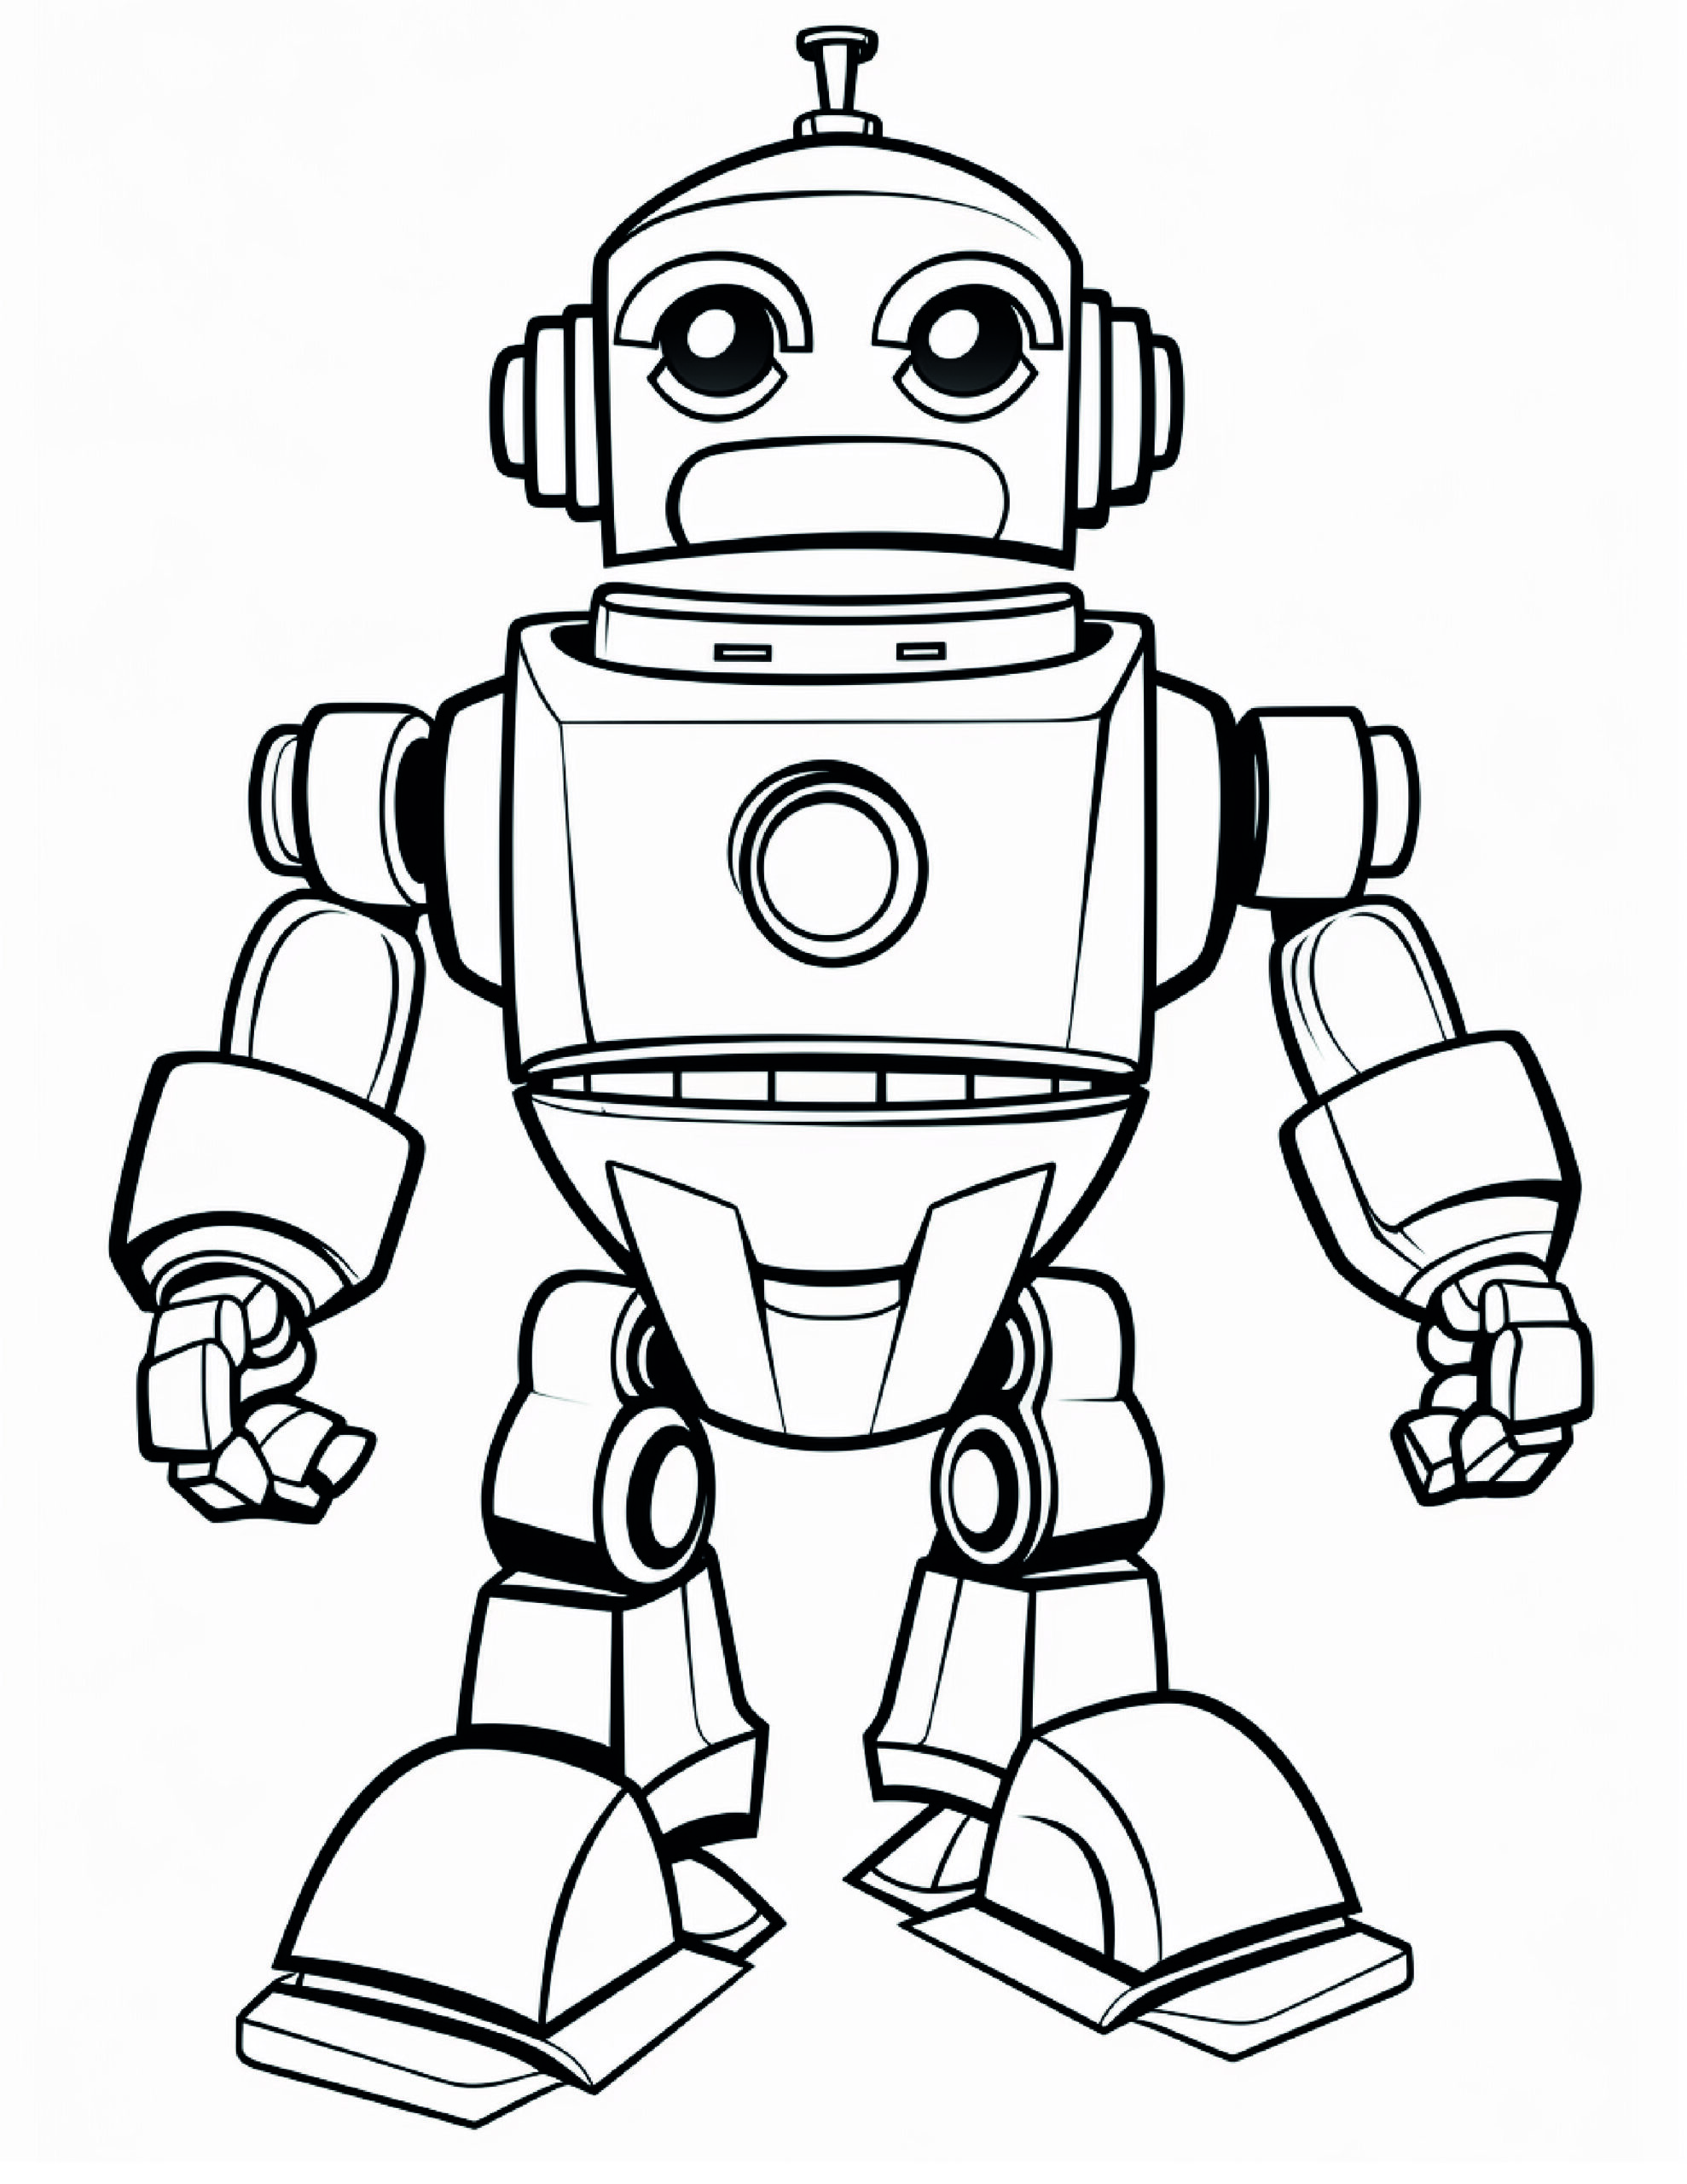 Robot Coloring Page 20 - A line drawing of an intelligent robot. 